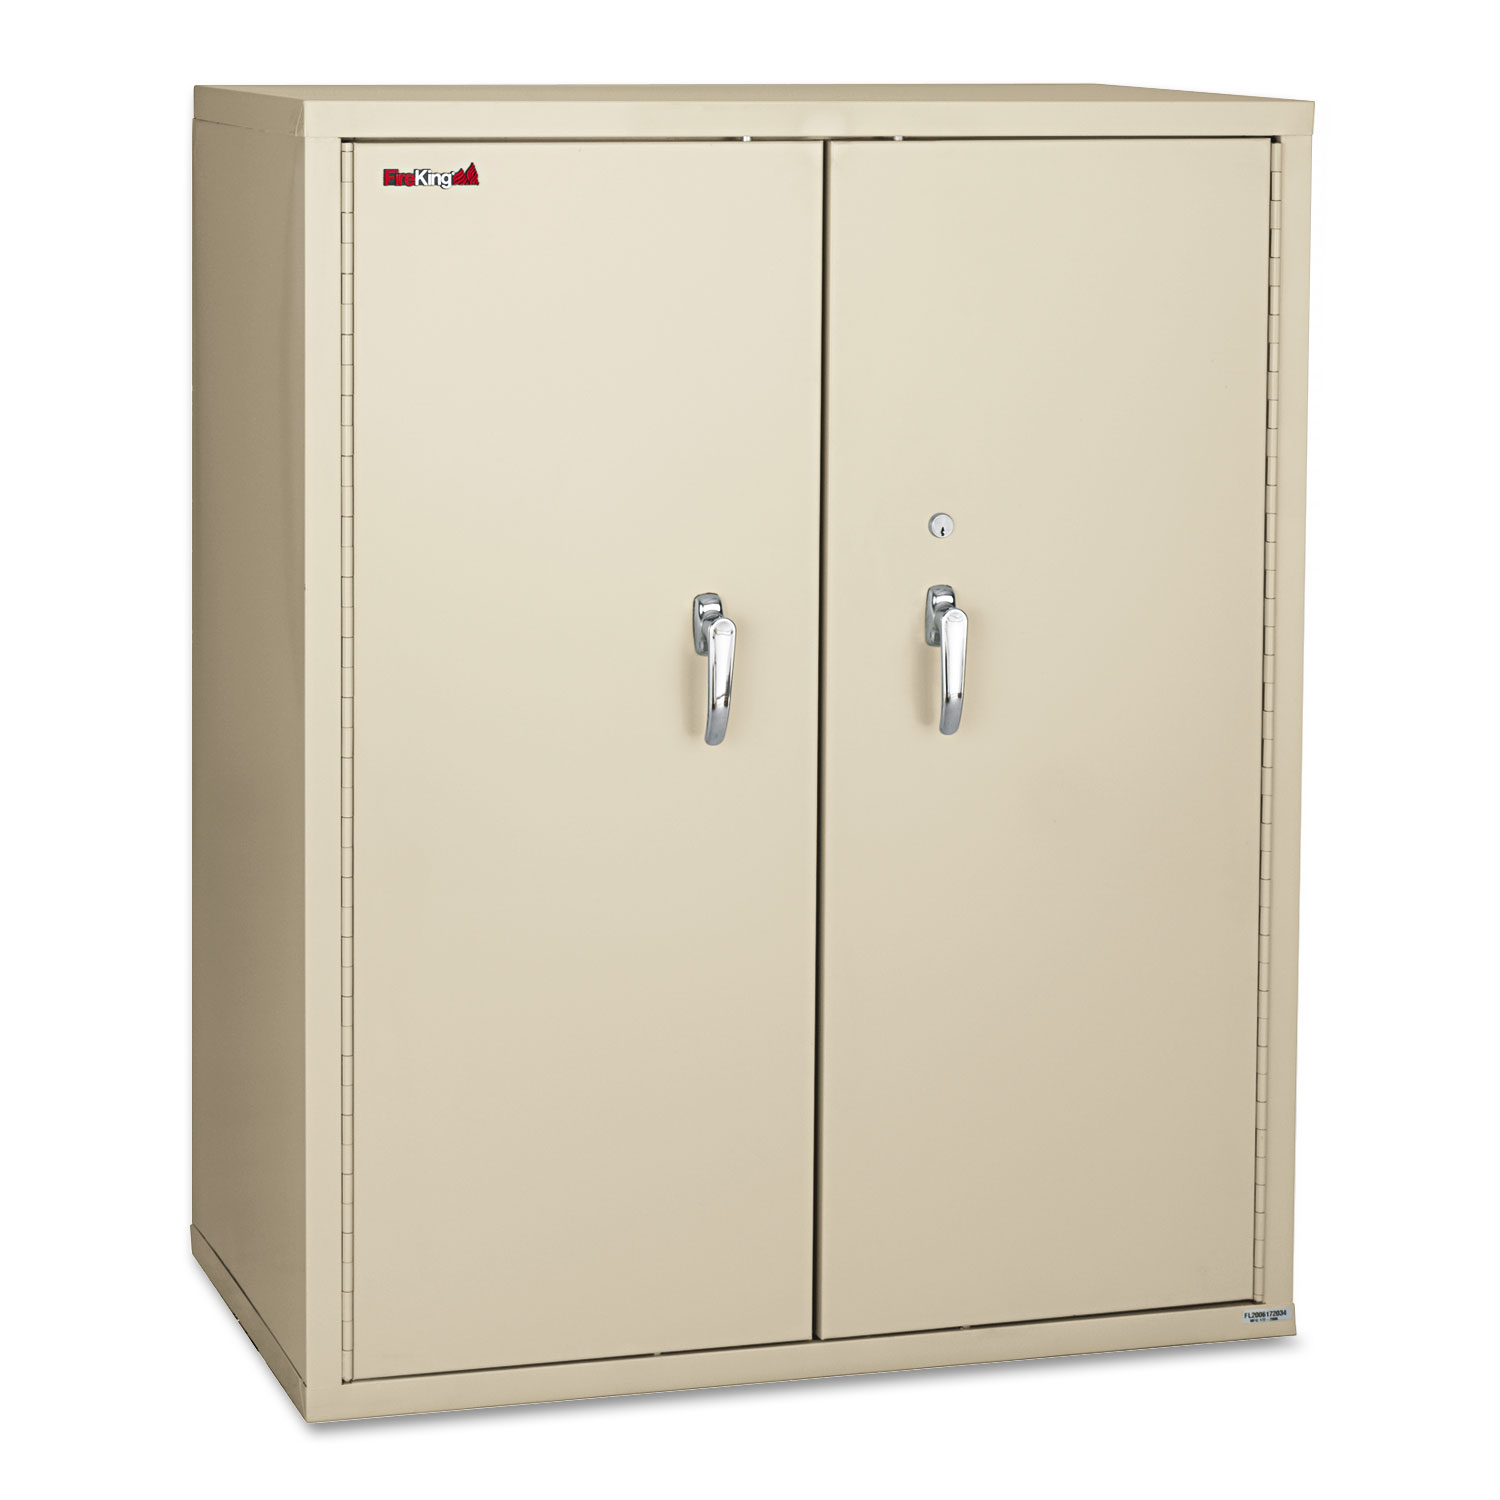 Storage Cabinet, 36w x 19-1/4d x 44h, UL Listed 350° for Fire, Parchment